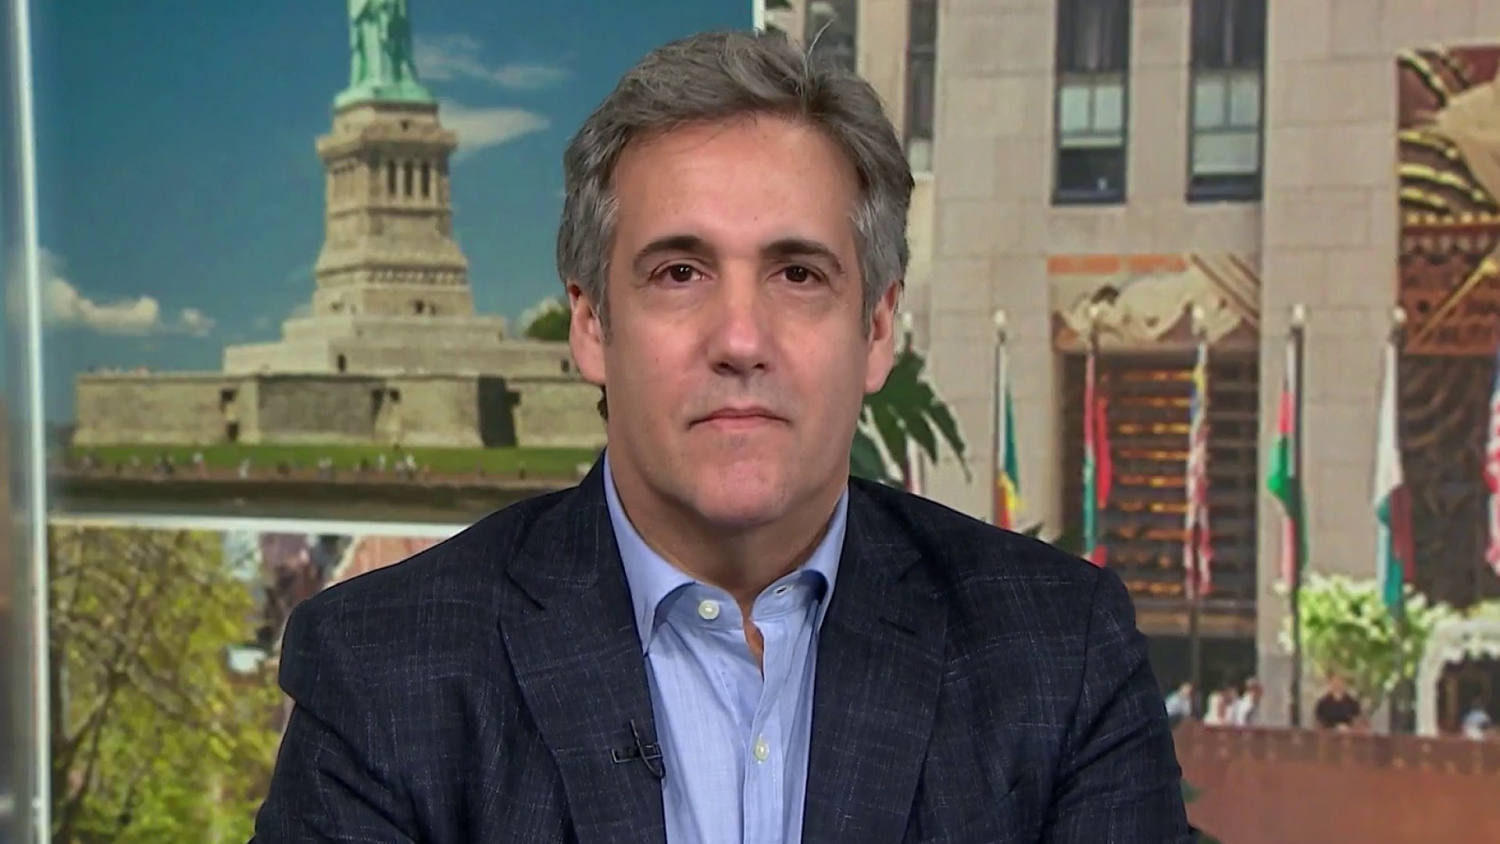 ‘He’s like a petulant child’: Michael Cohen on why Trump stormed out after his testimony thumbnail